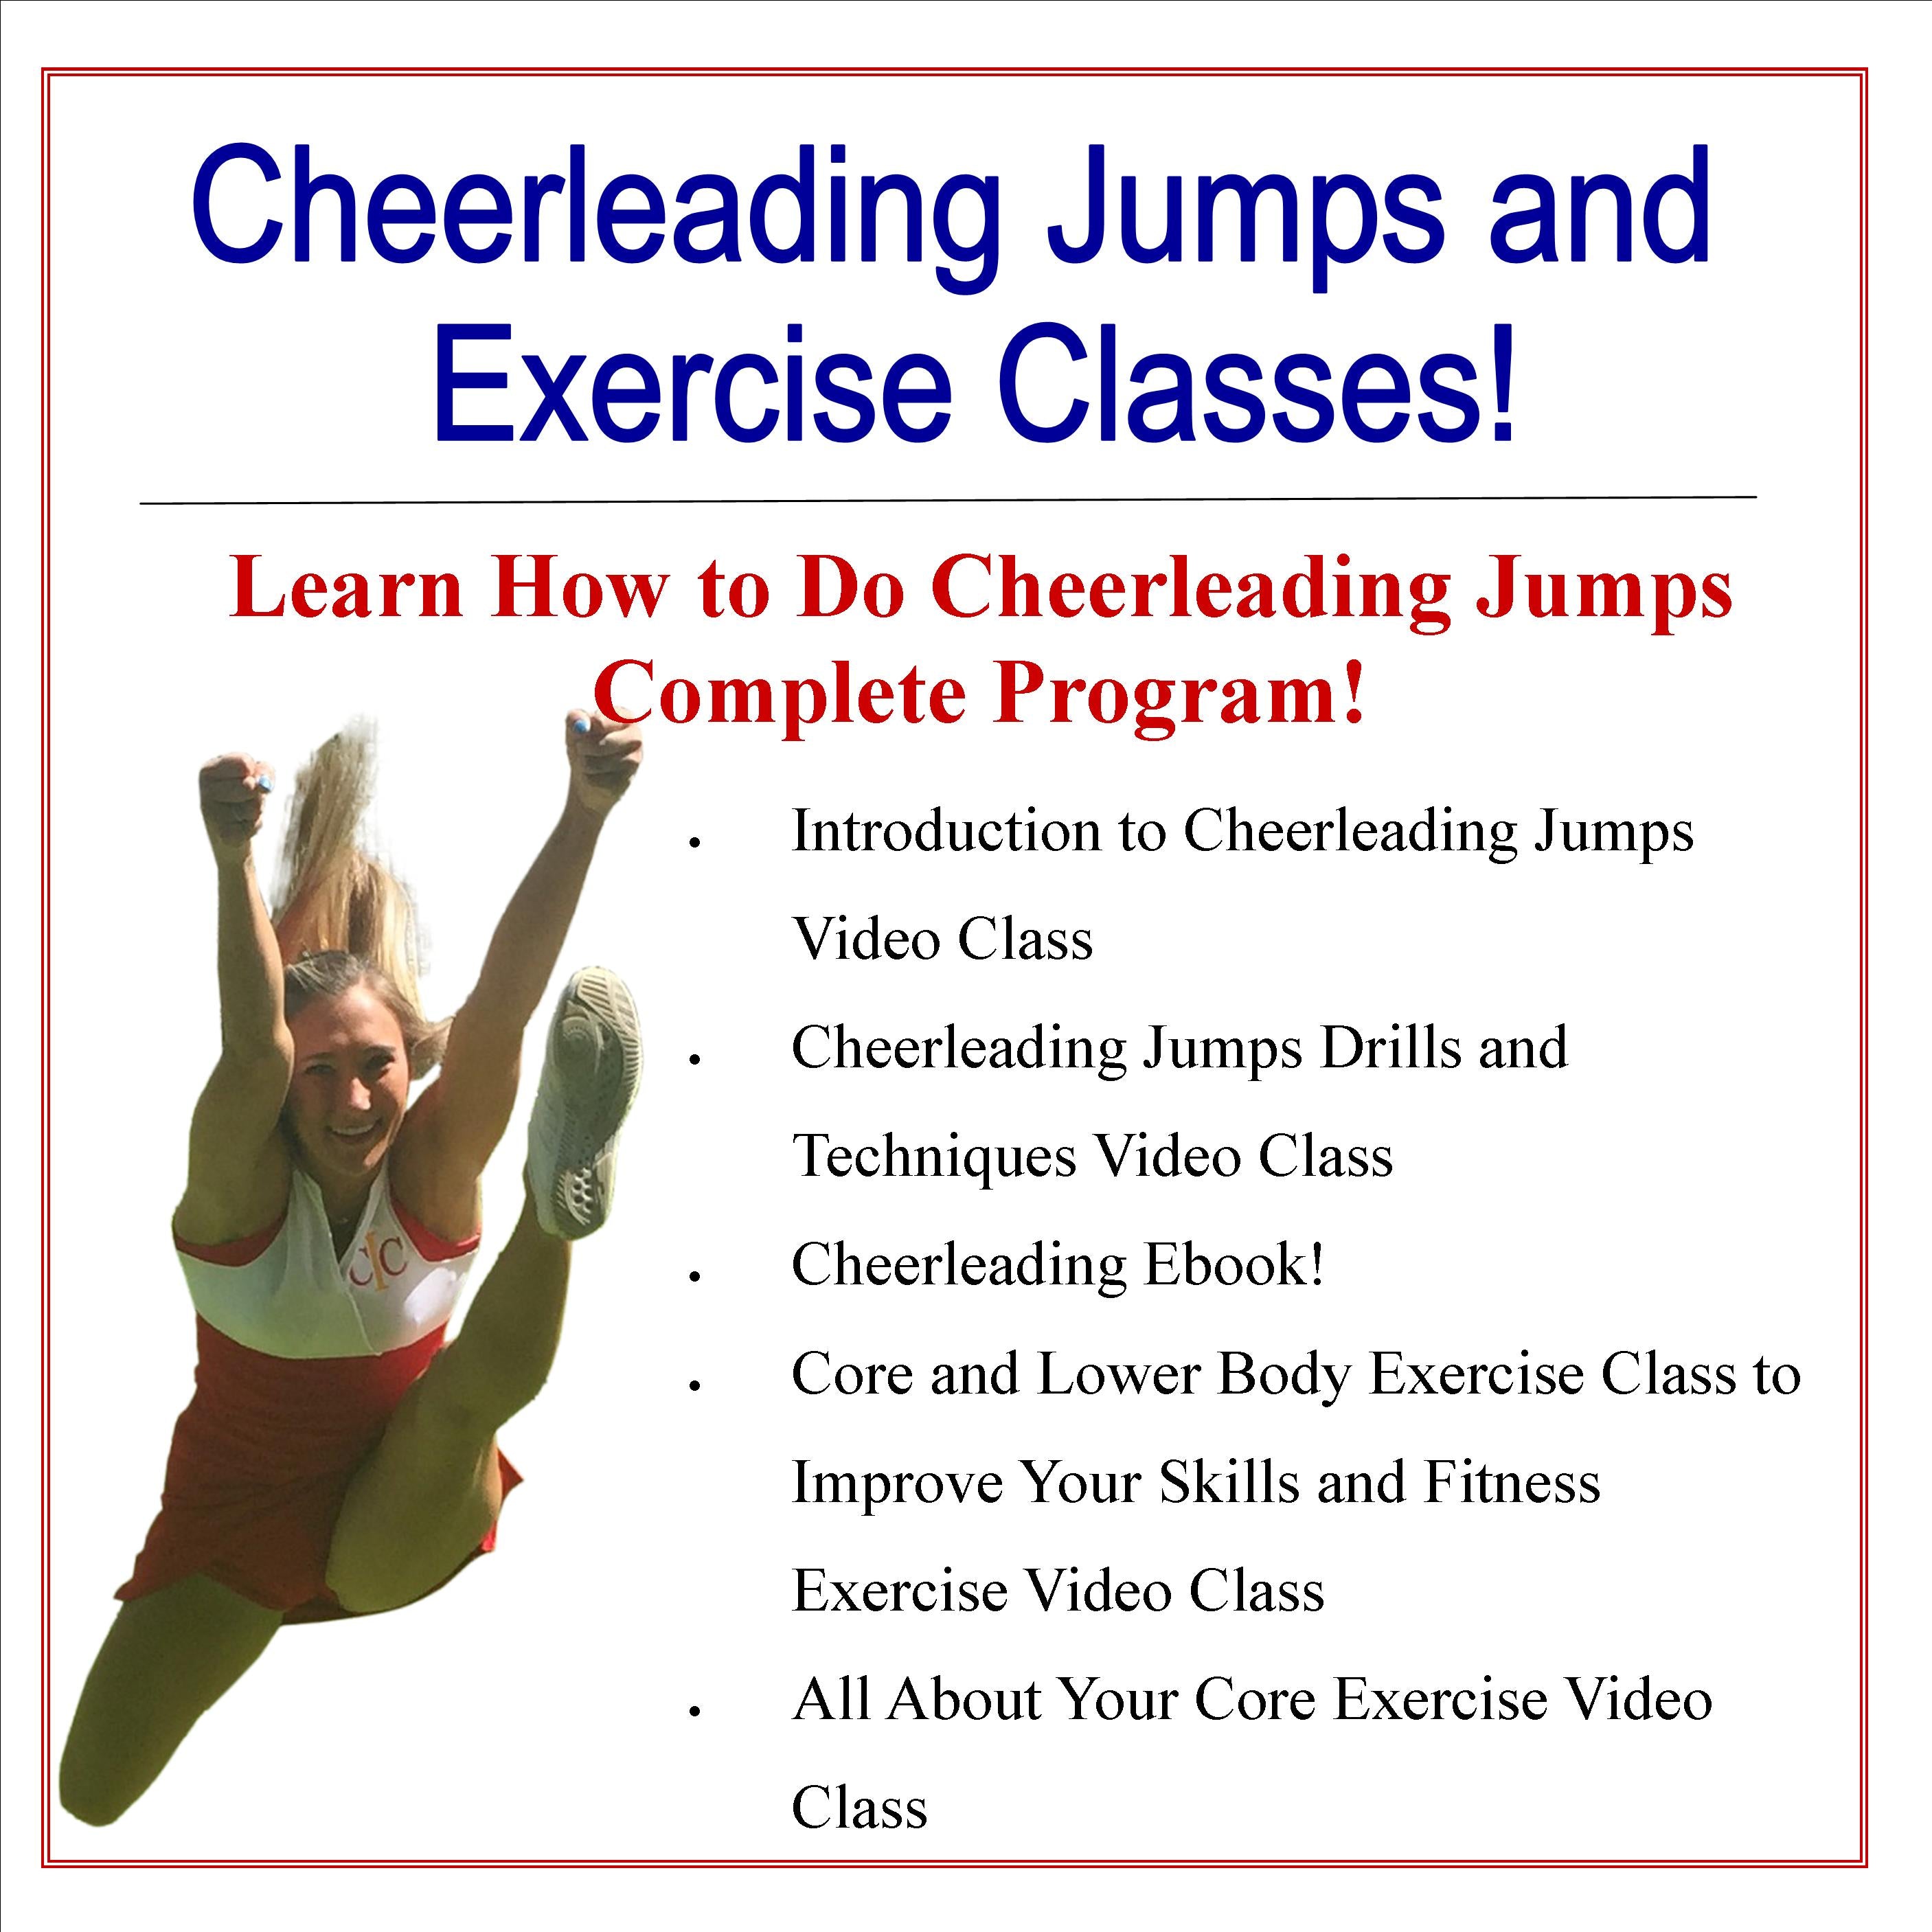 Cheerleading Jumps and Exercises Complete Program - Video Classes